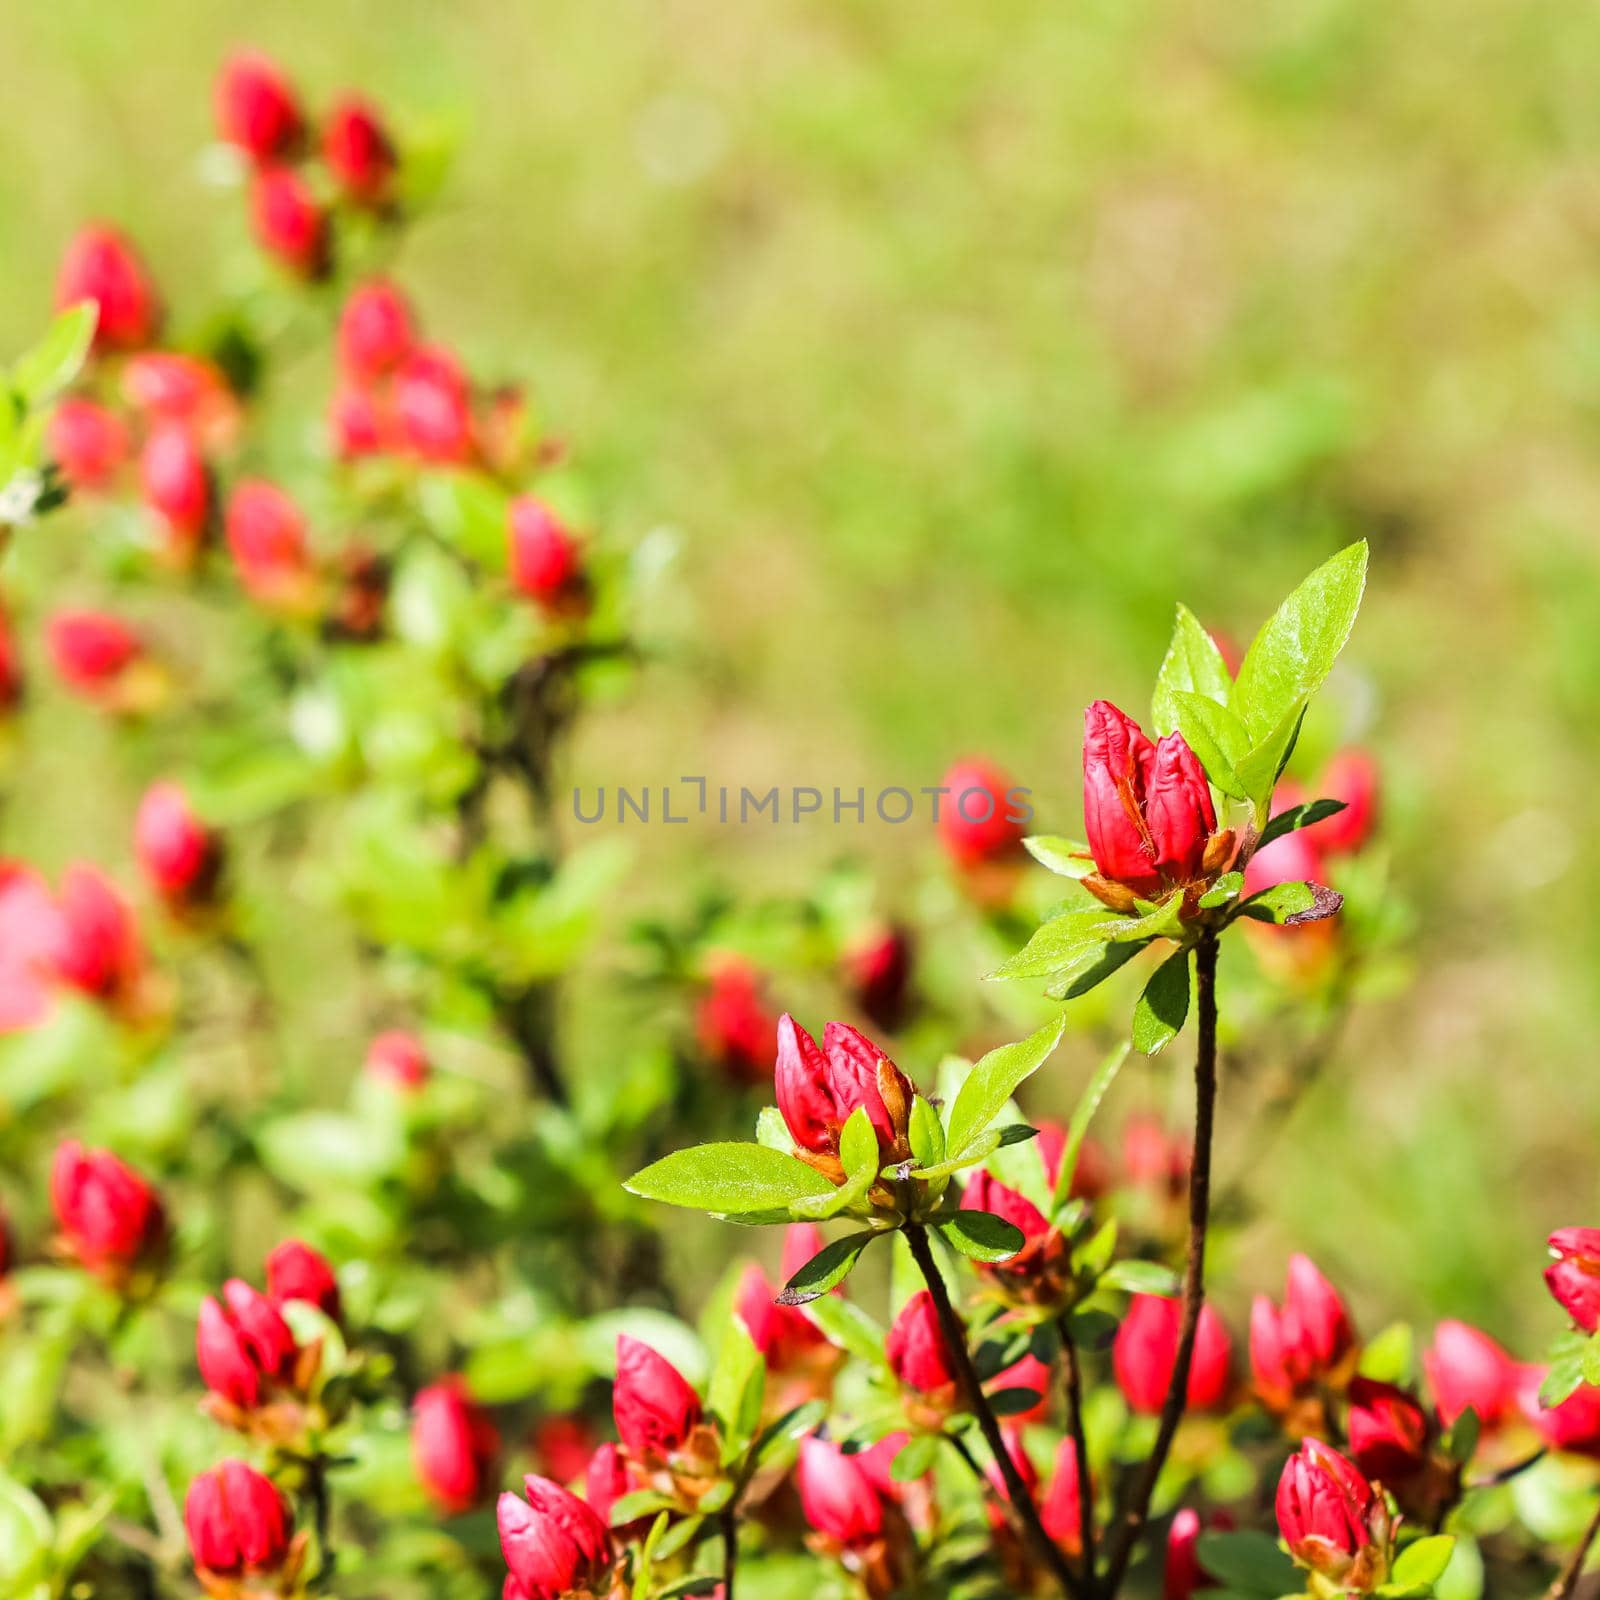 Blooming red azalea flowers and buds in the spring garden. Gardening concept. Floral background